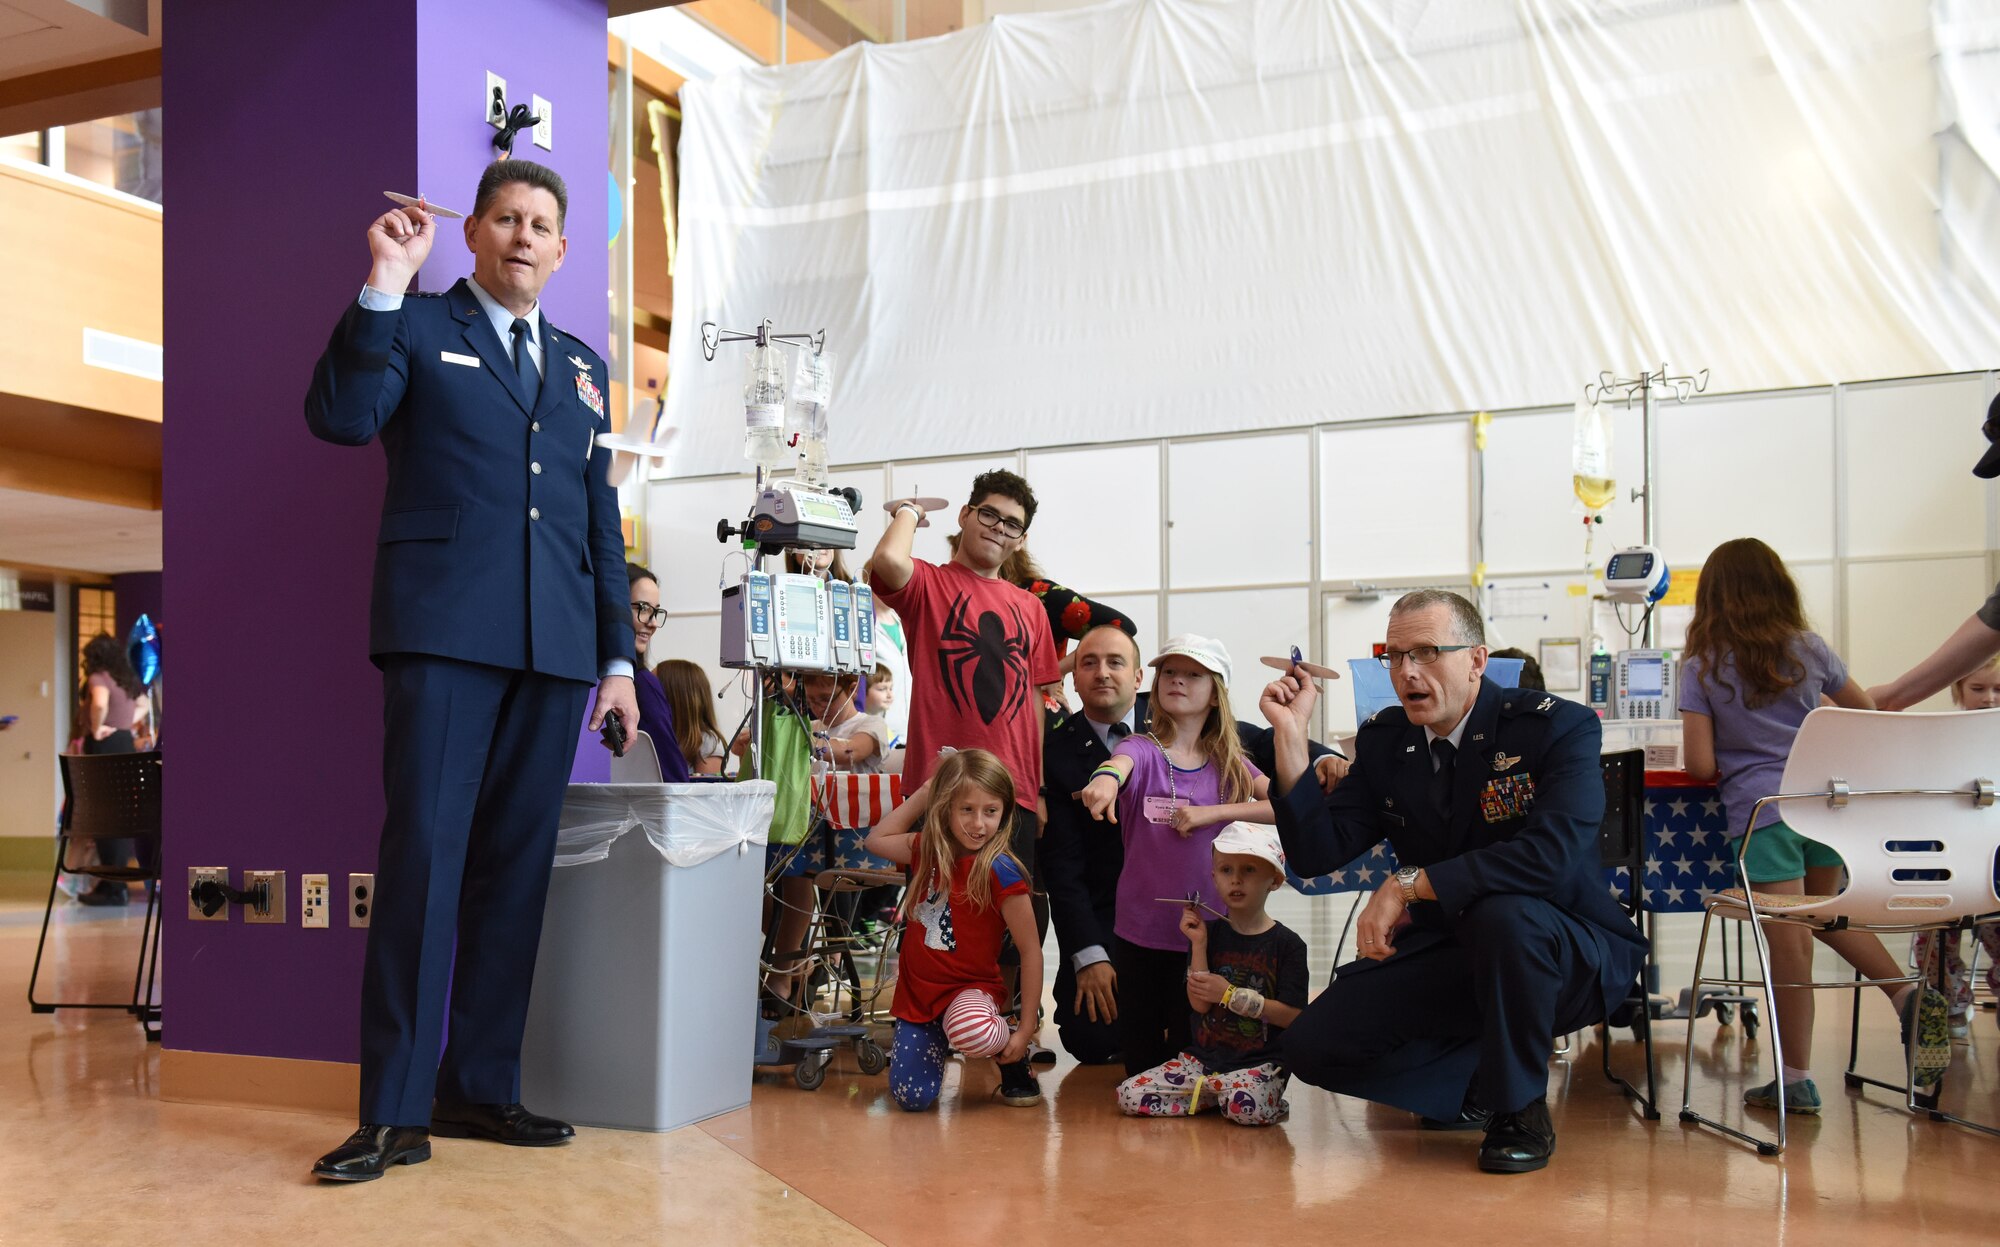 Lt. Gen. David Thompson, Air Force Space Command vice commander, prepares for a toy airplane race with Public Affairs Officer Capt. Justin Lewis, 911th Operations Group Commander Col. Gregory Buchanan, patients and their families at the Children’s Hospital of Pittsburgh, June 14, 2019.